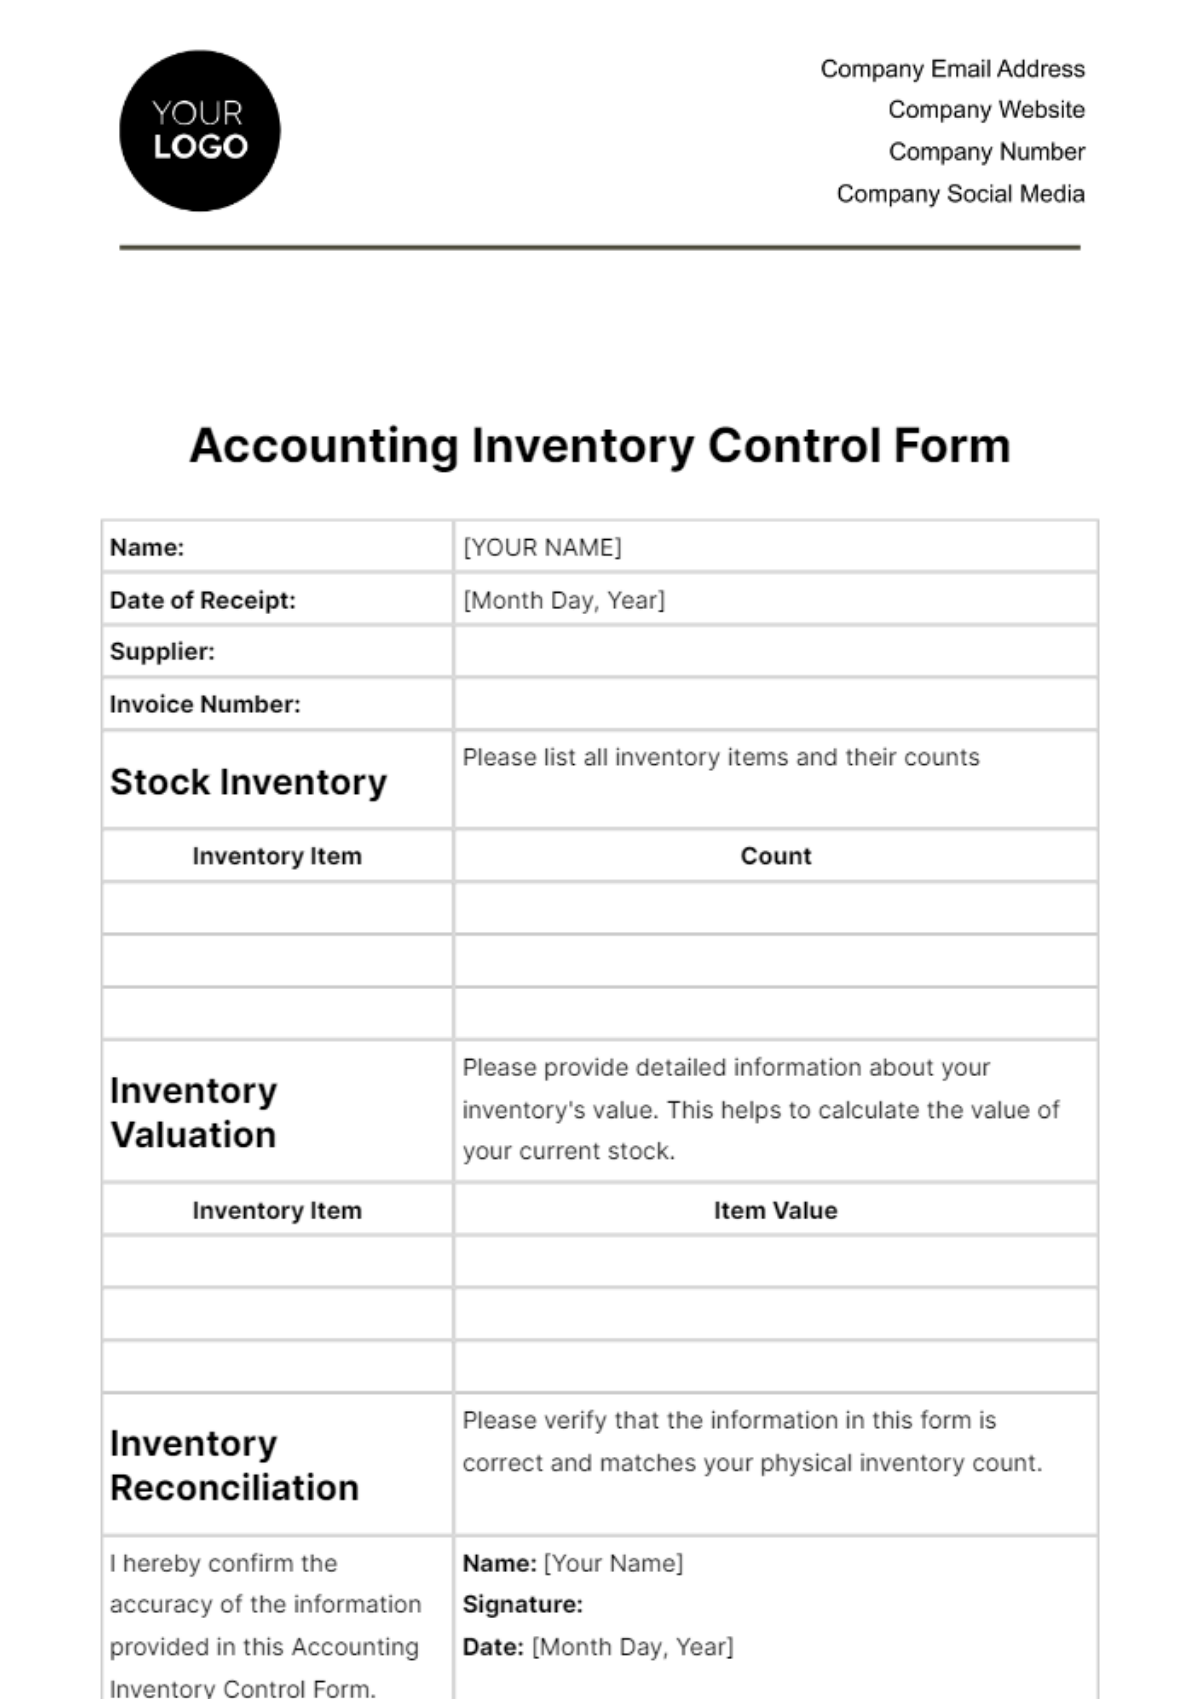 Accounting Inventory Control Form Template